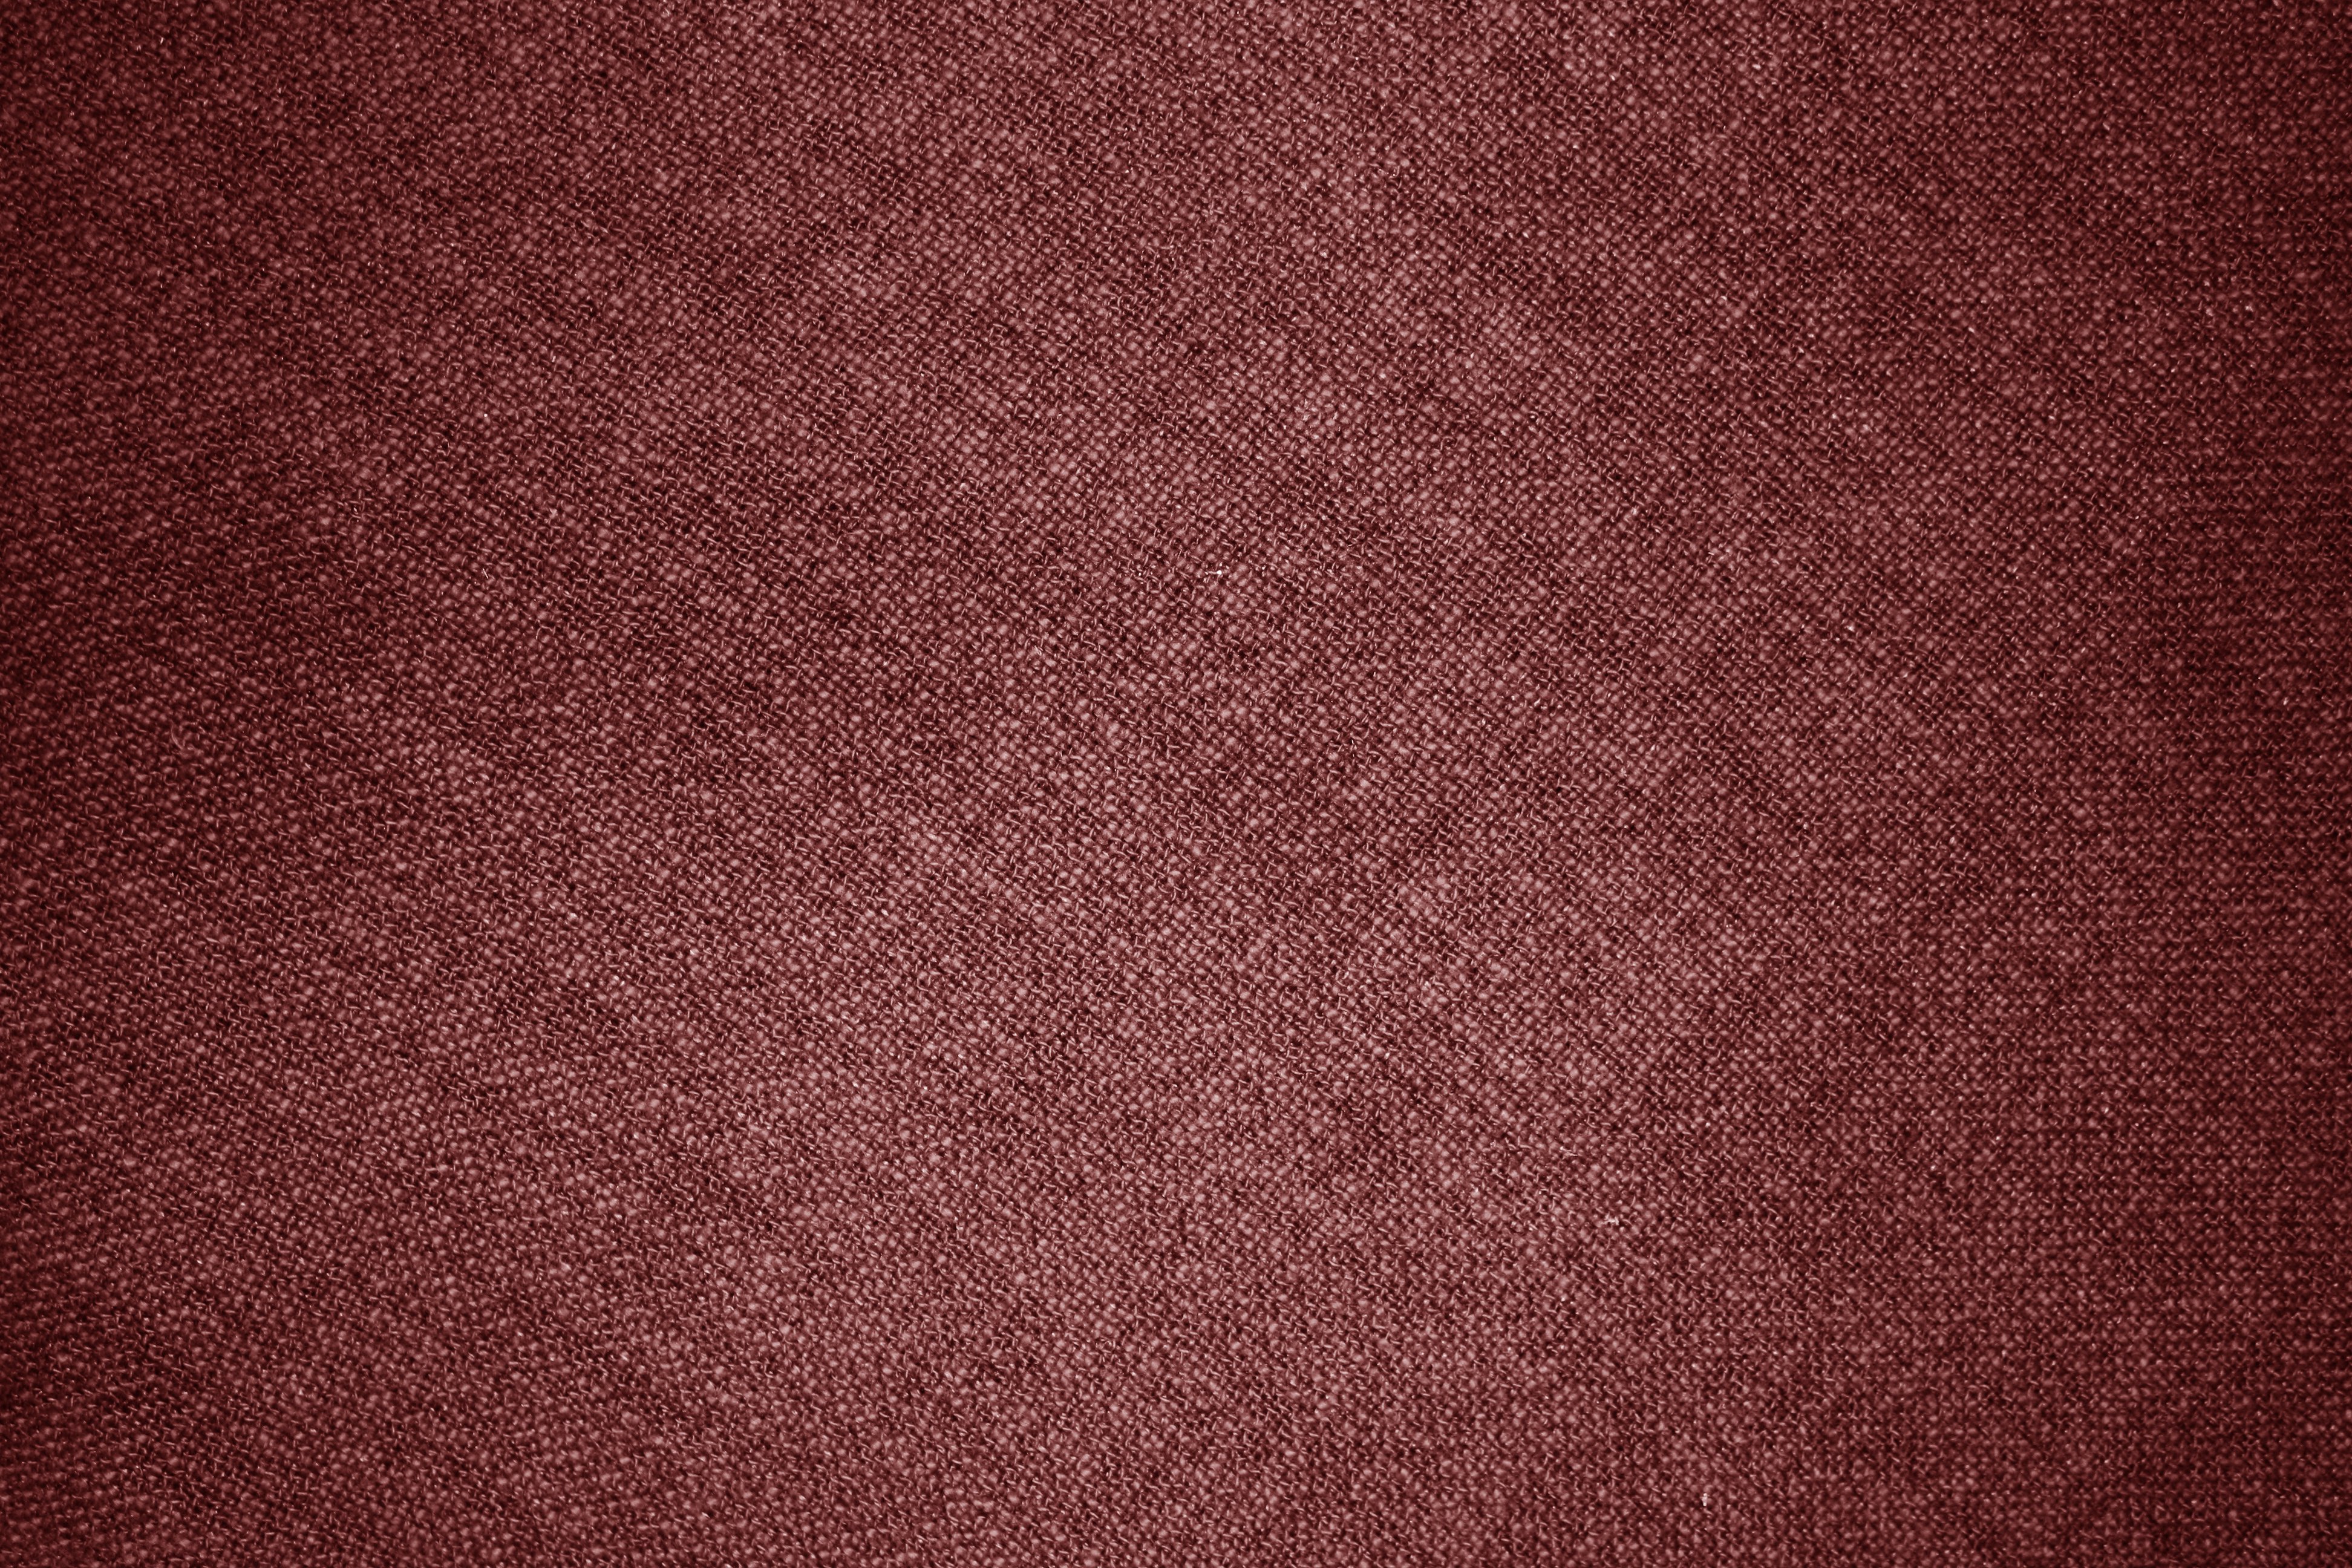 Maroon Fabric Texture Picture | Free Photograph | Photos Public Domain